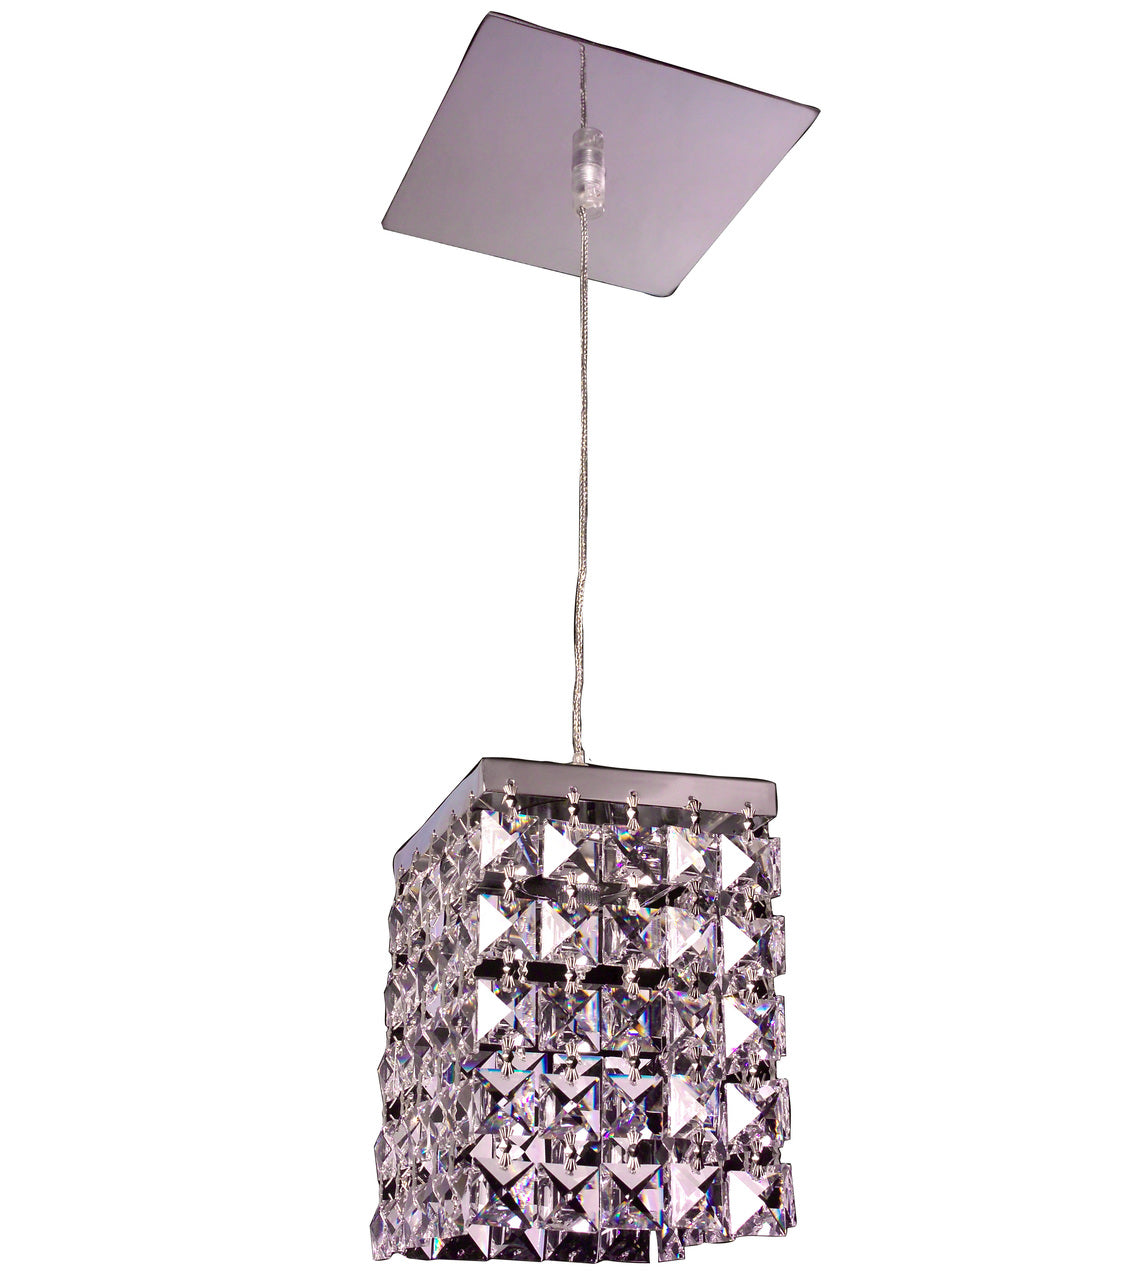 Classic Lighting 16101 CPSQ Bedazzle Crystal Pendant in Chrome